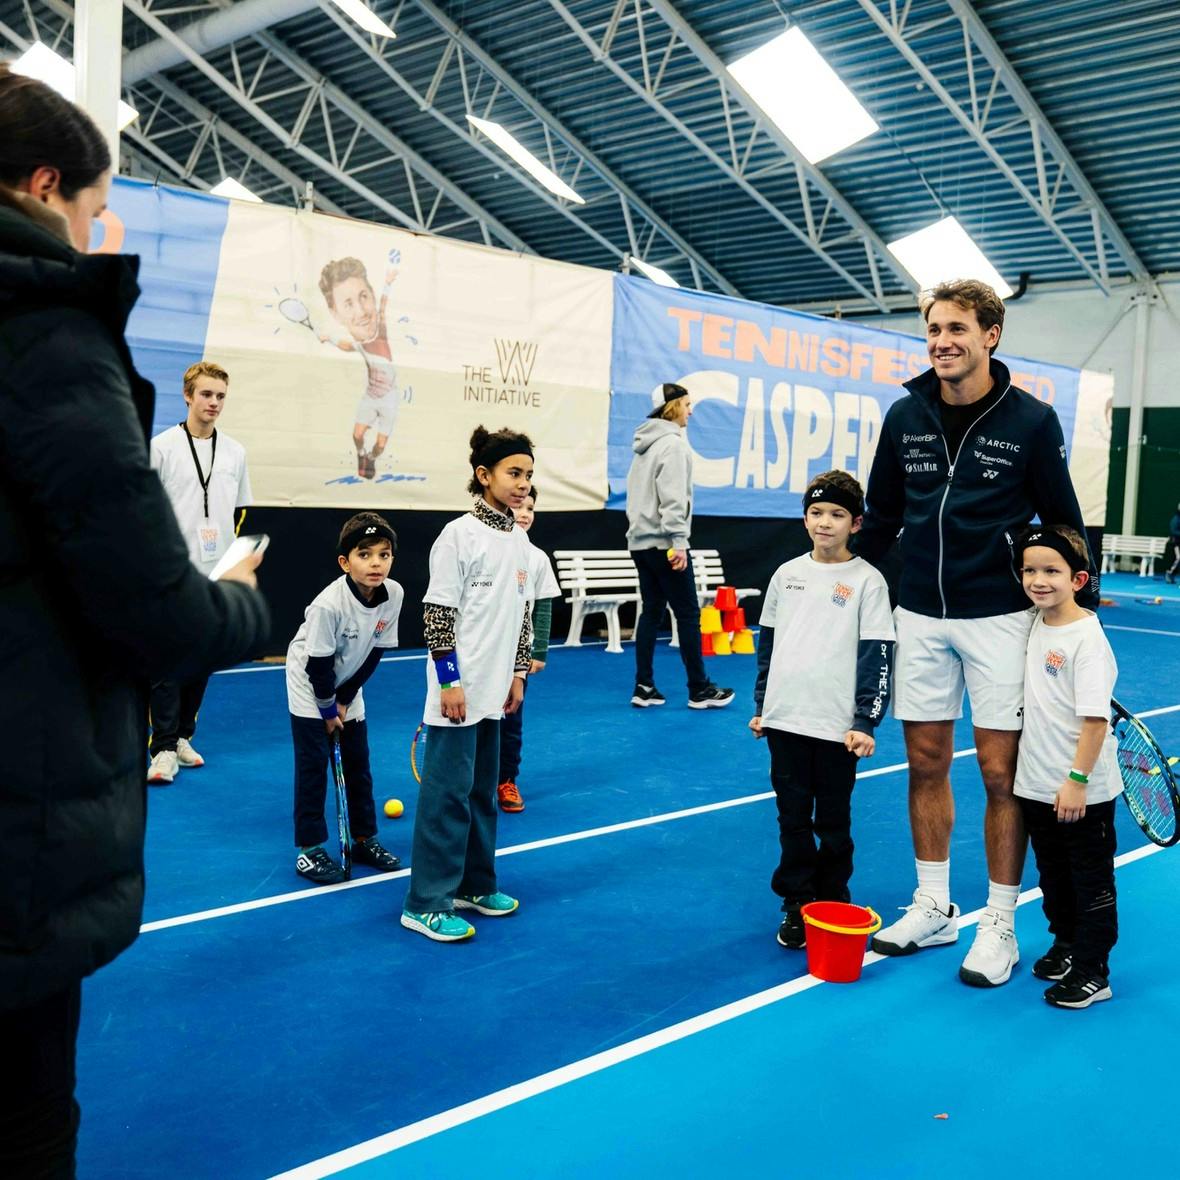 Tennis player Casper Ruud is taking photos with children participating in the tennis festival